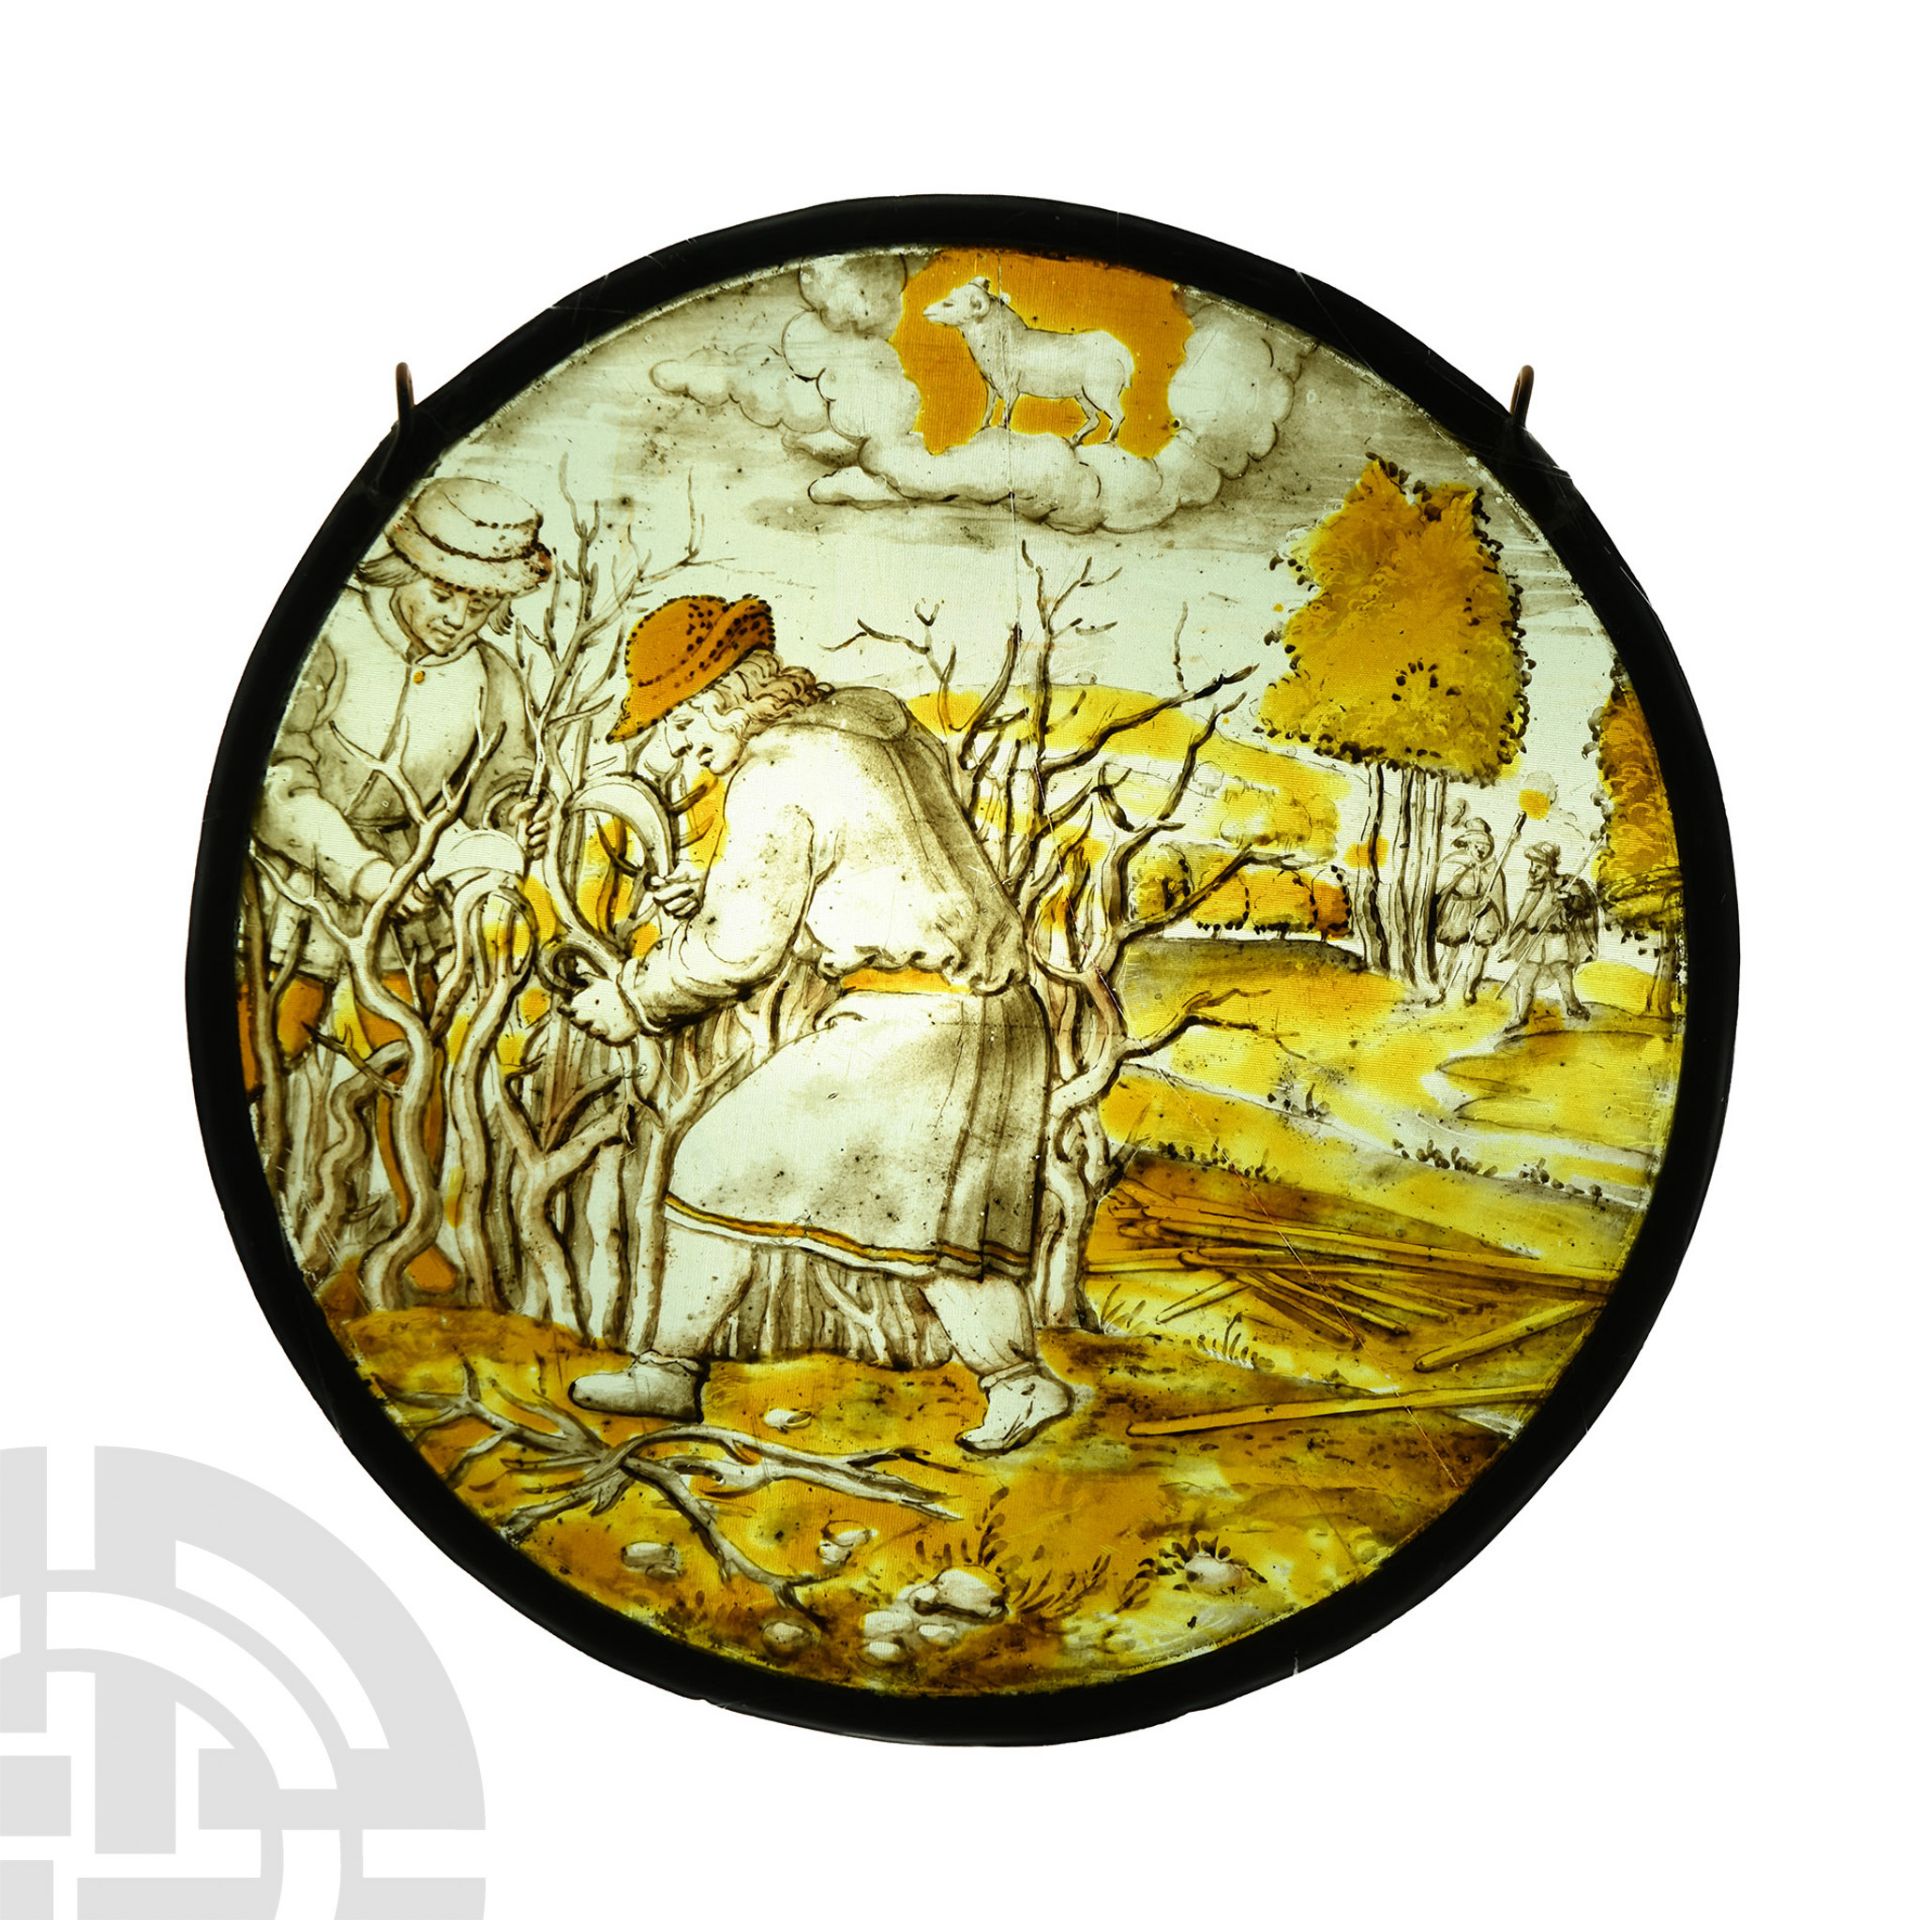 Renaissance Stained Glass Panel of The Month of March